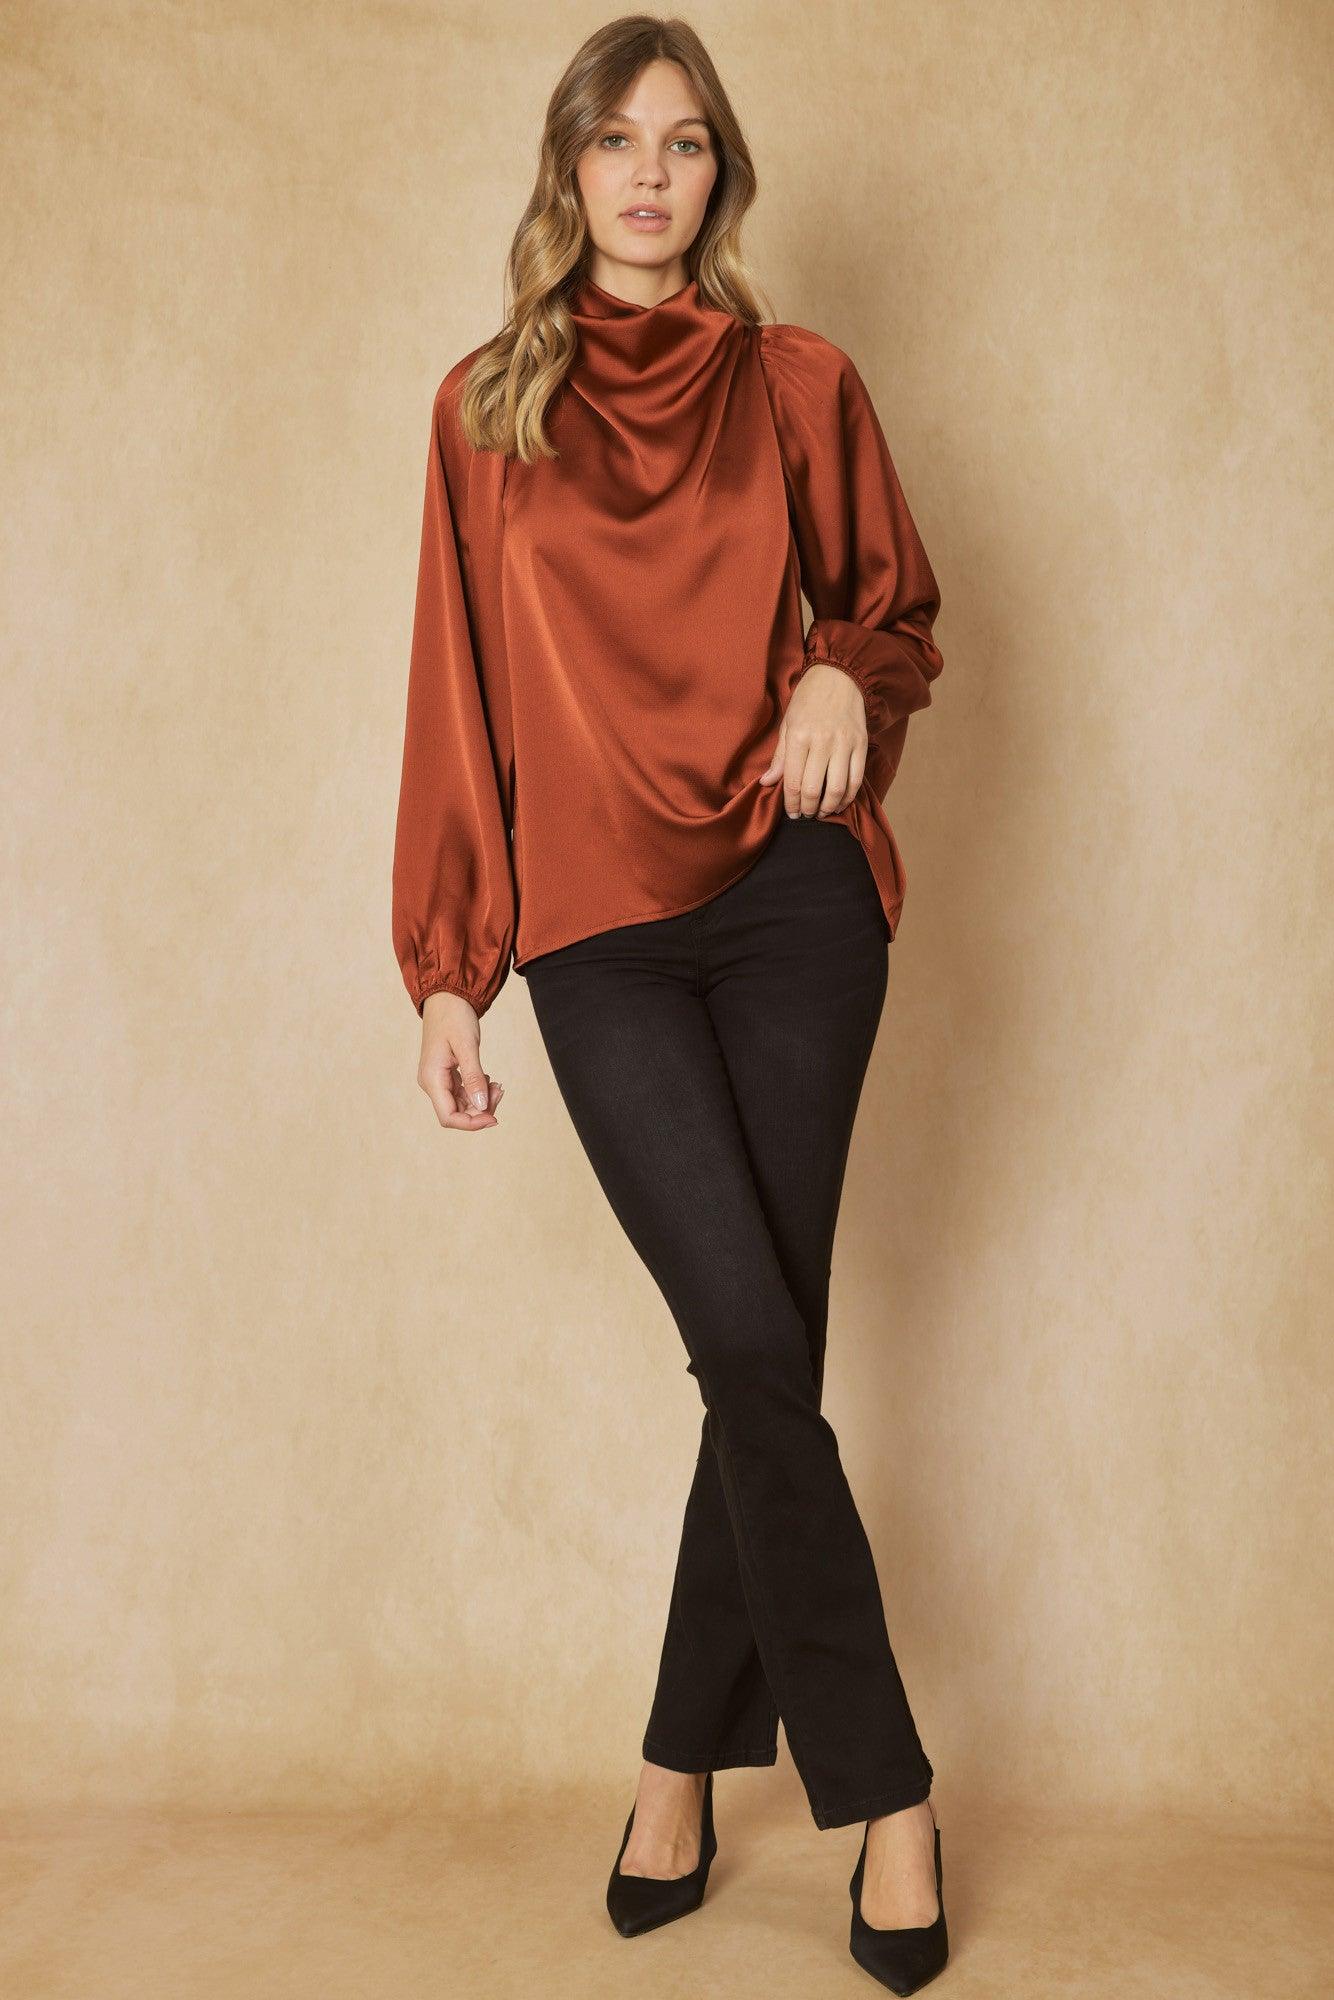 Satin drape neck long sleeve top - RK Collections Boutique